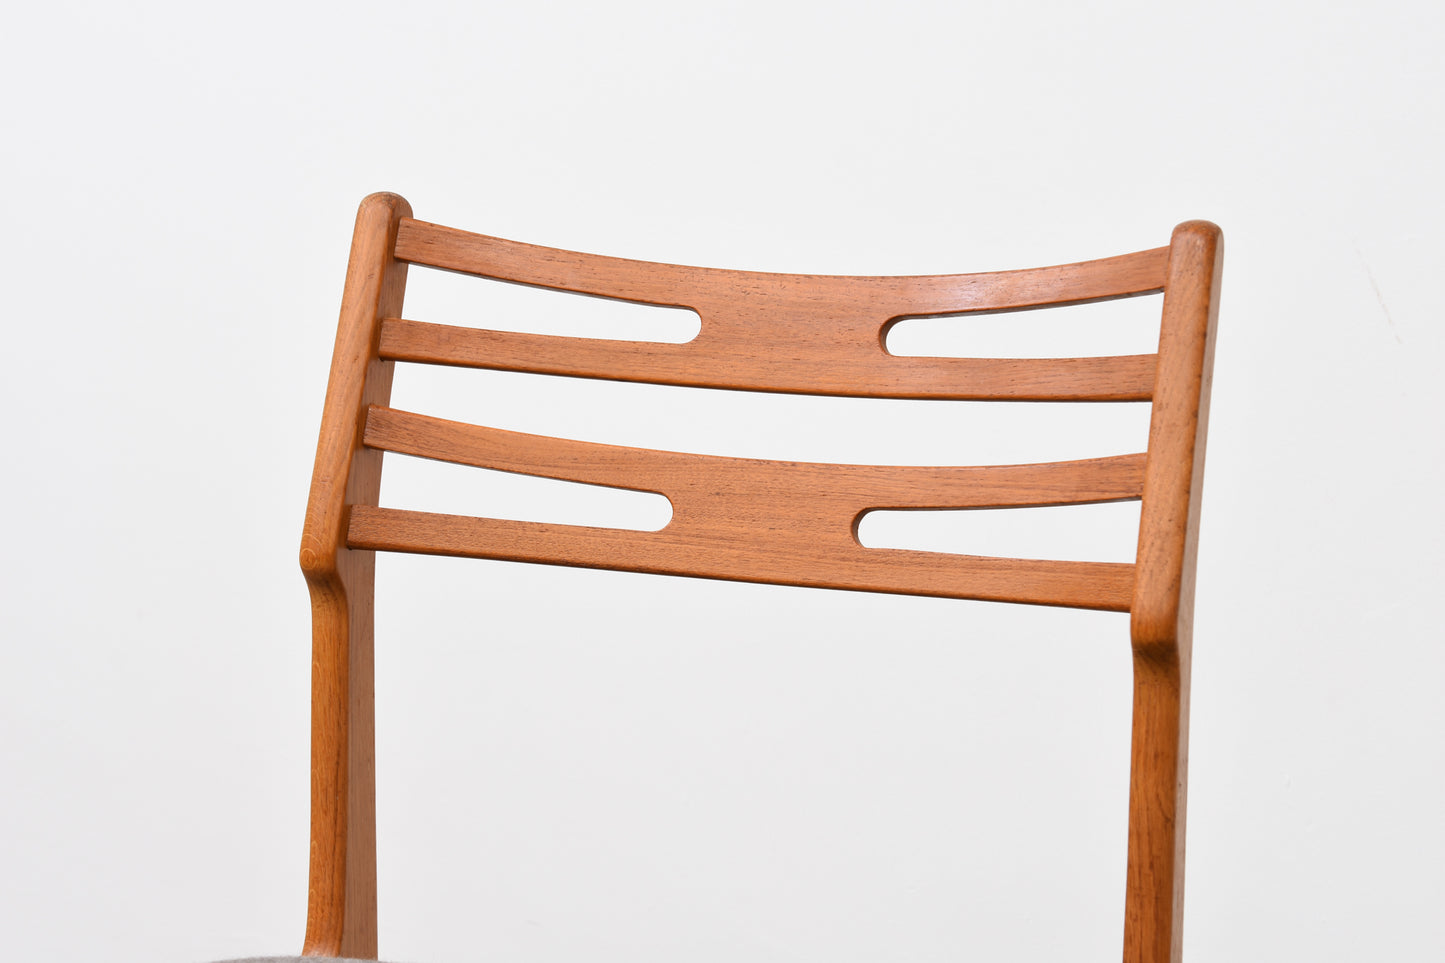 Two available: Model 101 chairs by Johannes Andersen